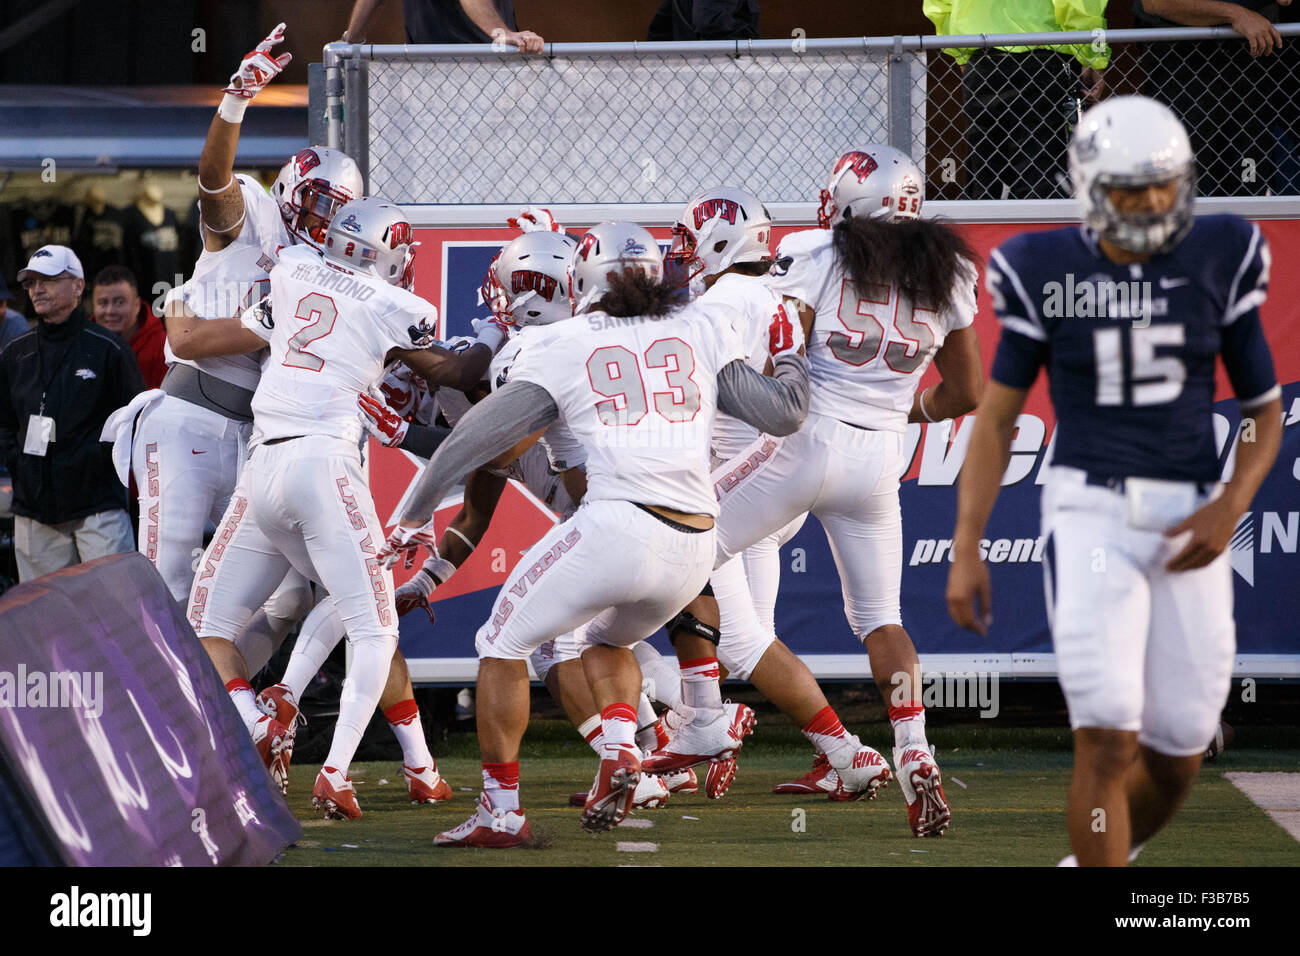 Reno, Nevada, USA. 3rd Oct, 2015. The UNLV players celebrate their third touchdown of the Mountain West game between the UNLV Rebels and the UNR Wolfpack at Mackay Stadium in Reno, Nevada. © Jeff Mulvihill Jr/ZUMA Wire/Alamy Live News Stock Photo